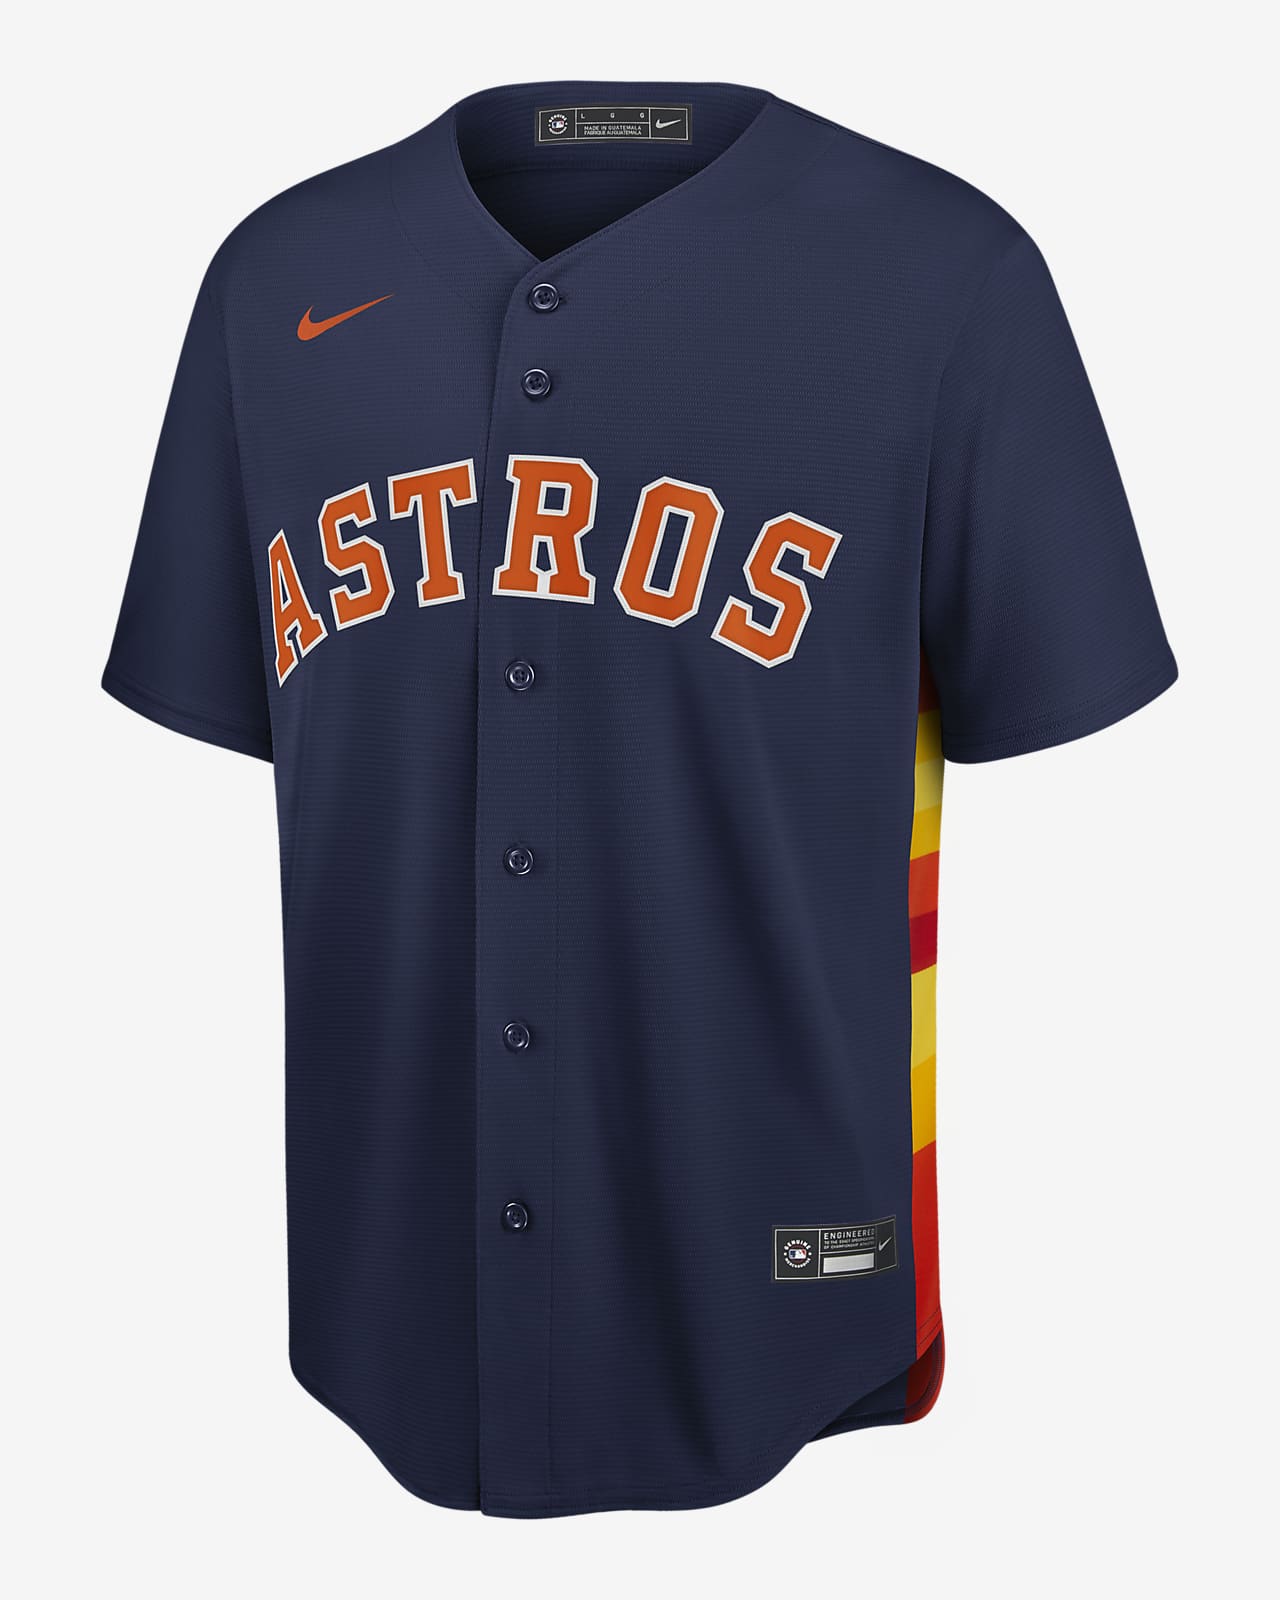 real astros jersey